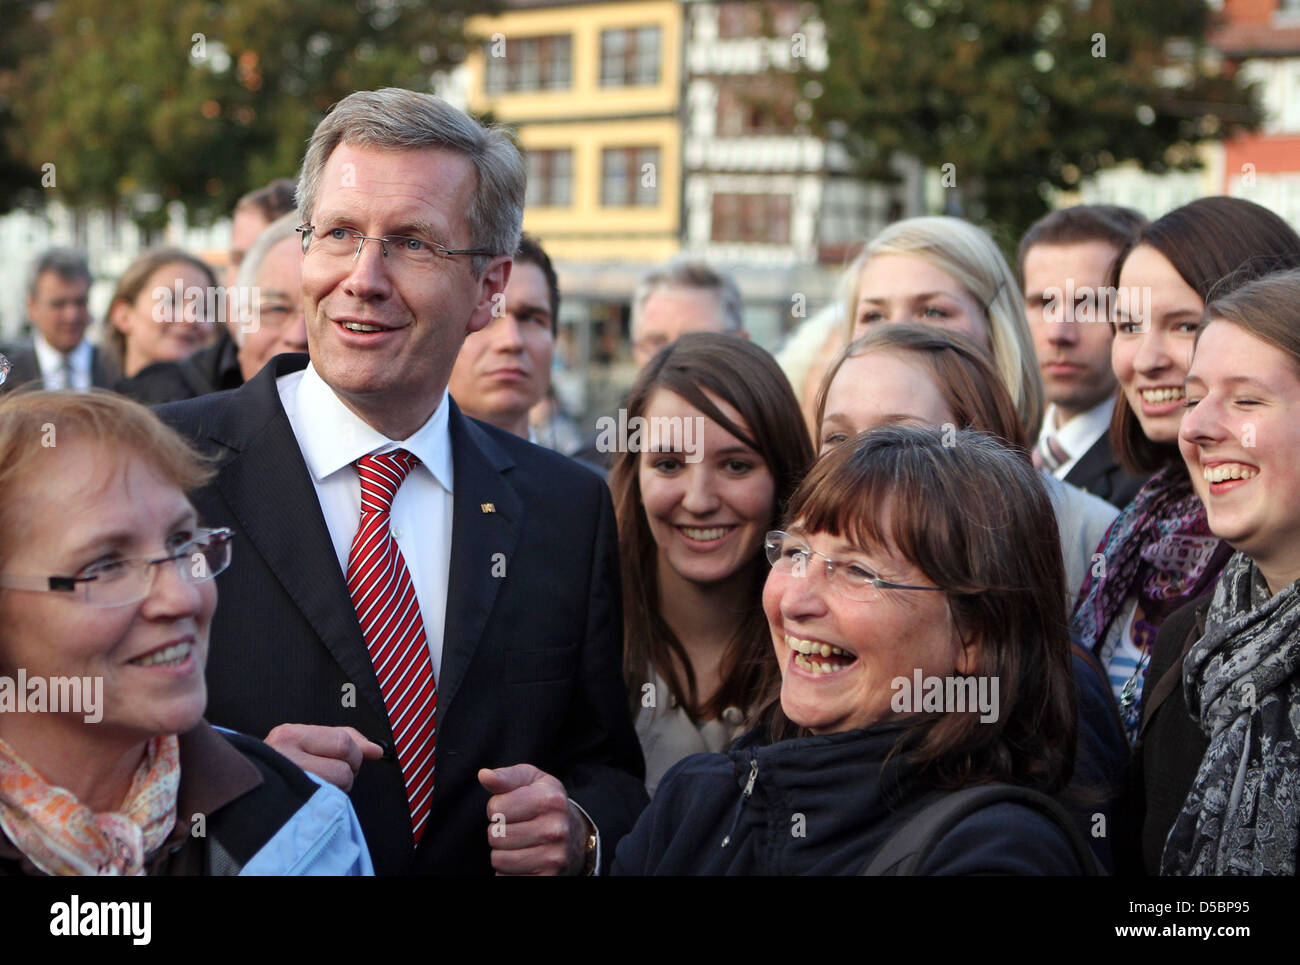 German President Christian Wulff (L) speaks with pupils in Erfurt, Germany, 13 September 2010. Mr Wulff is on an introduction trip through Germany. Photo: JAN WOITAS Stock Photo